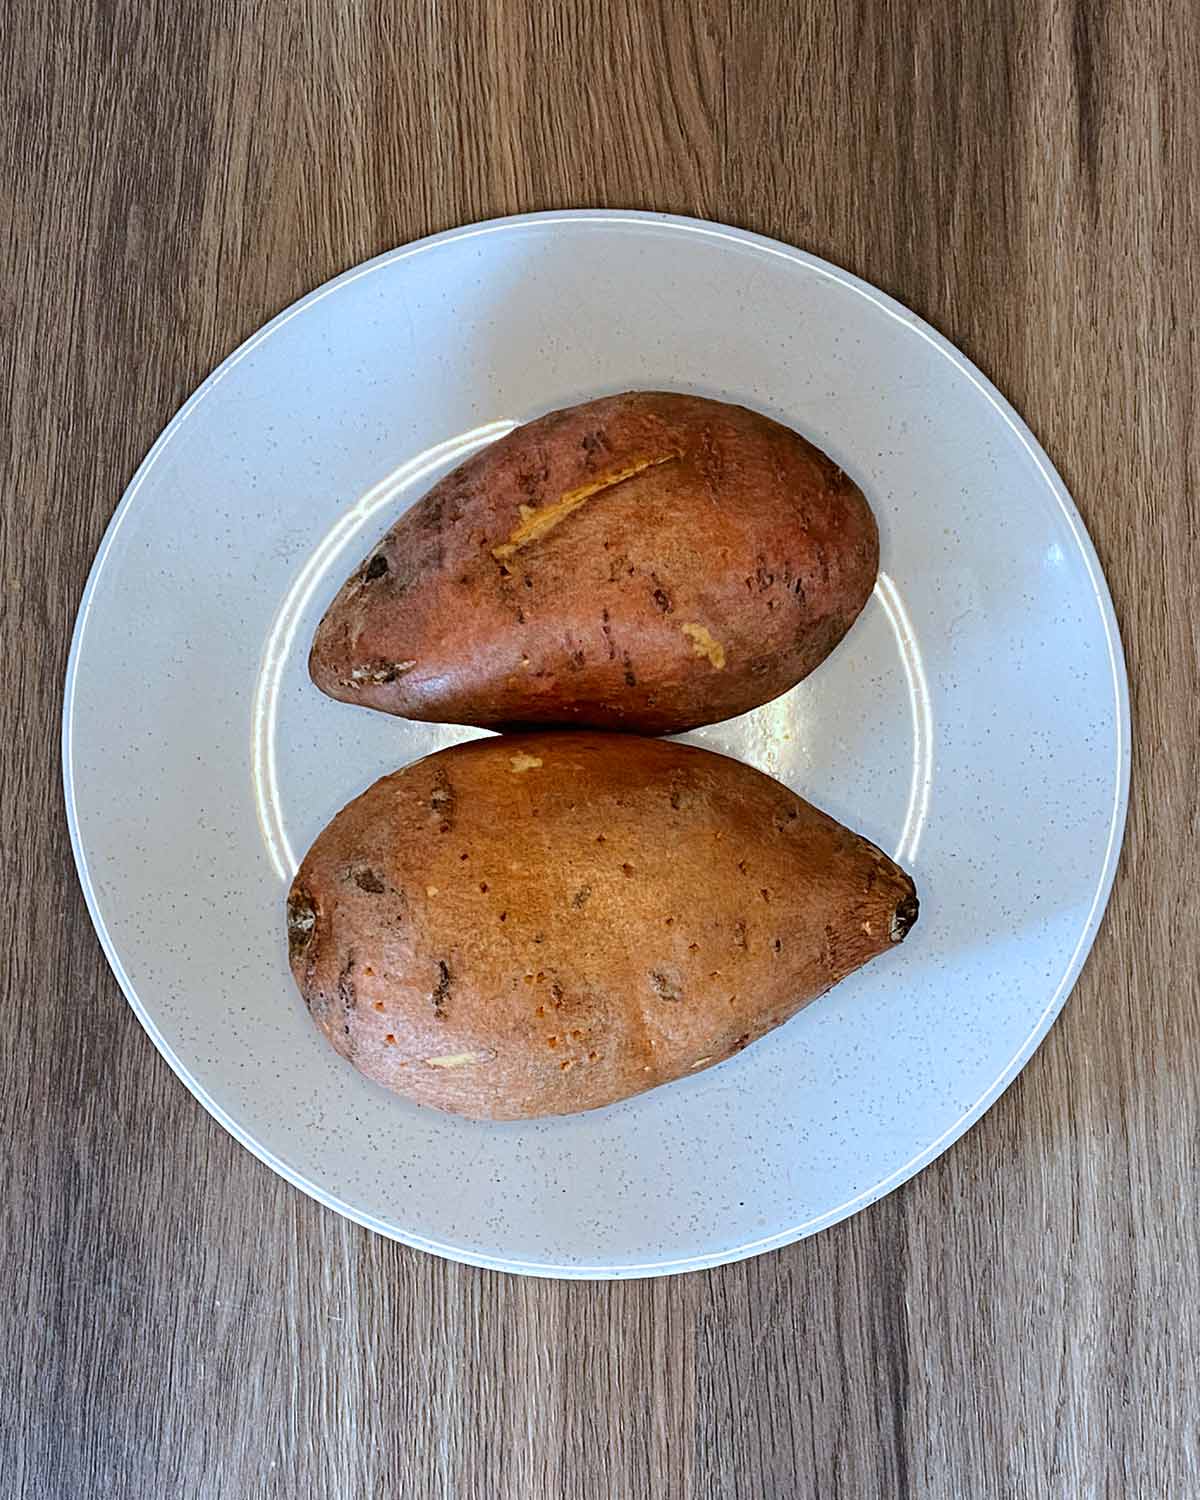 Two pricked sweet potatoes on a plate.